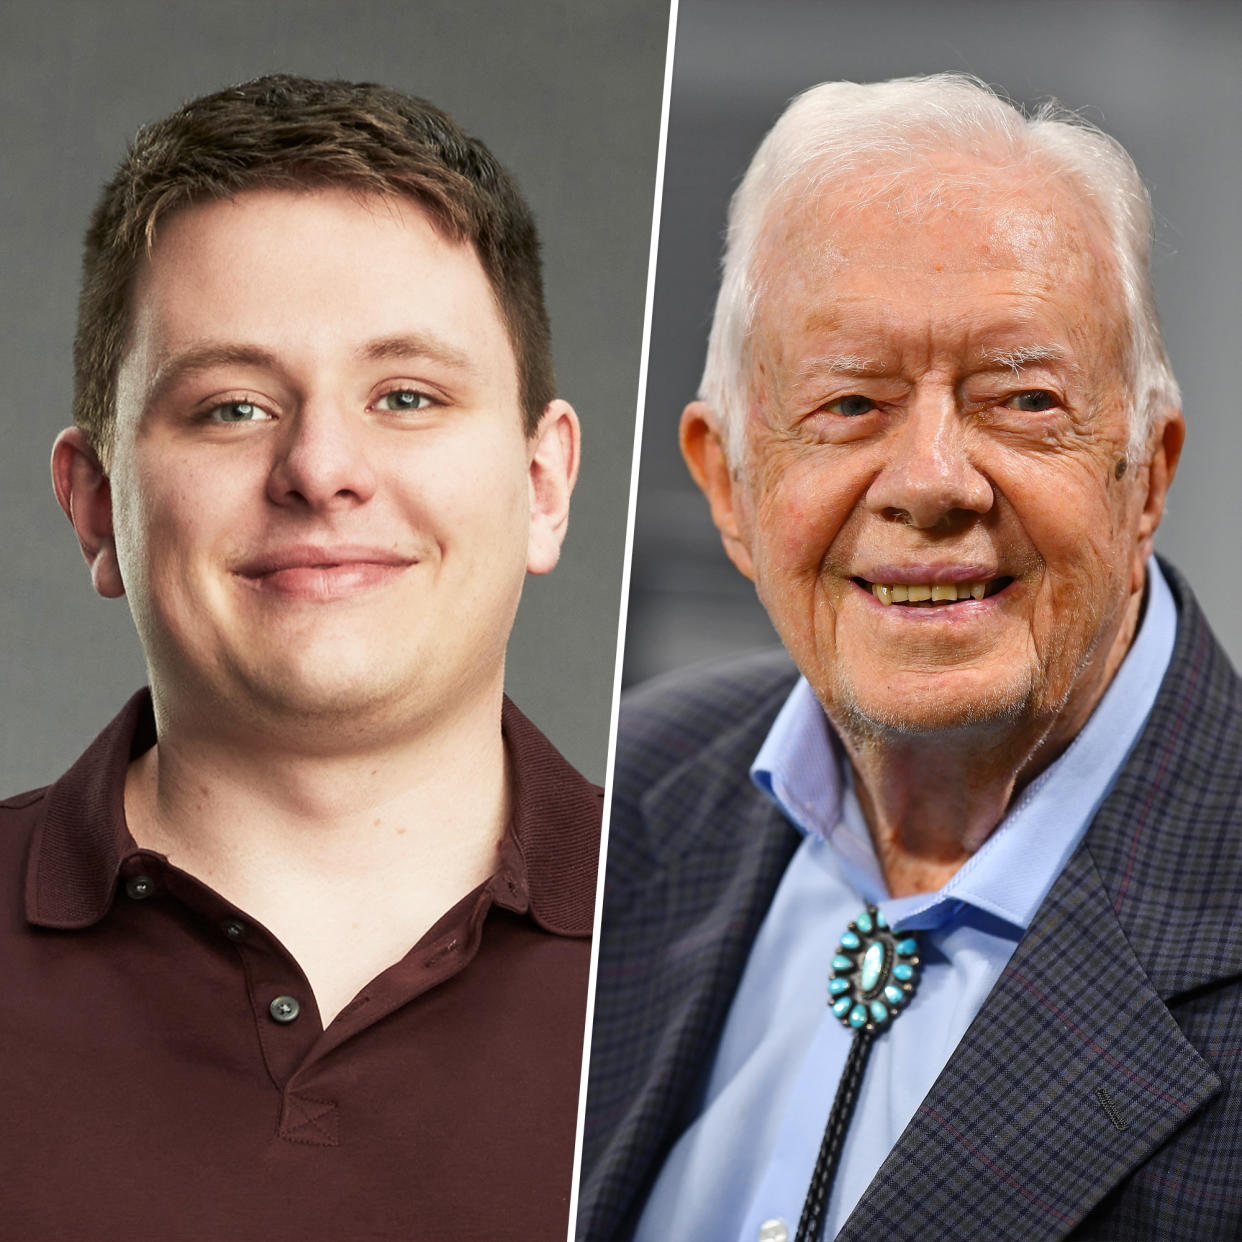 Hugo / Jimmy Carter (ABC / Getty Images)